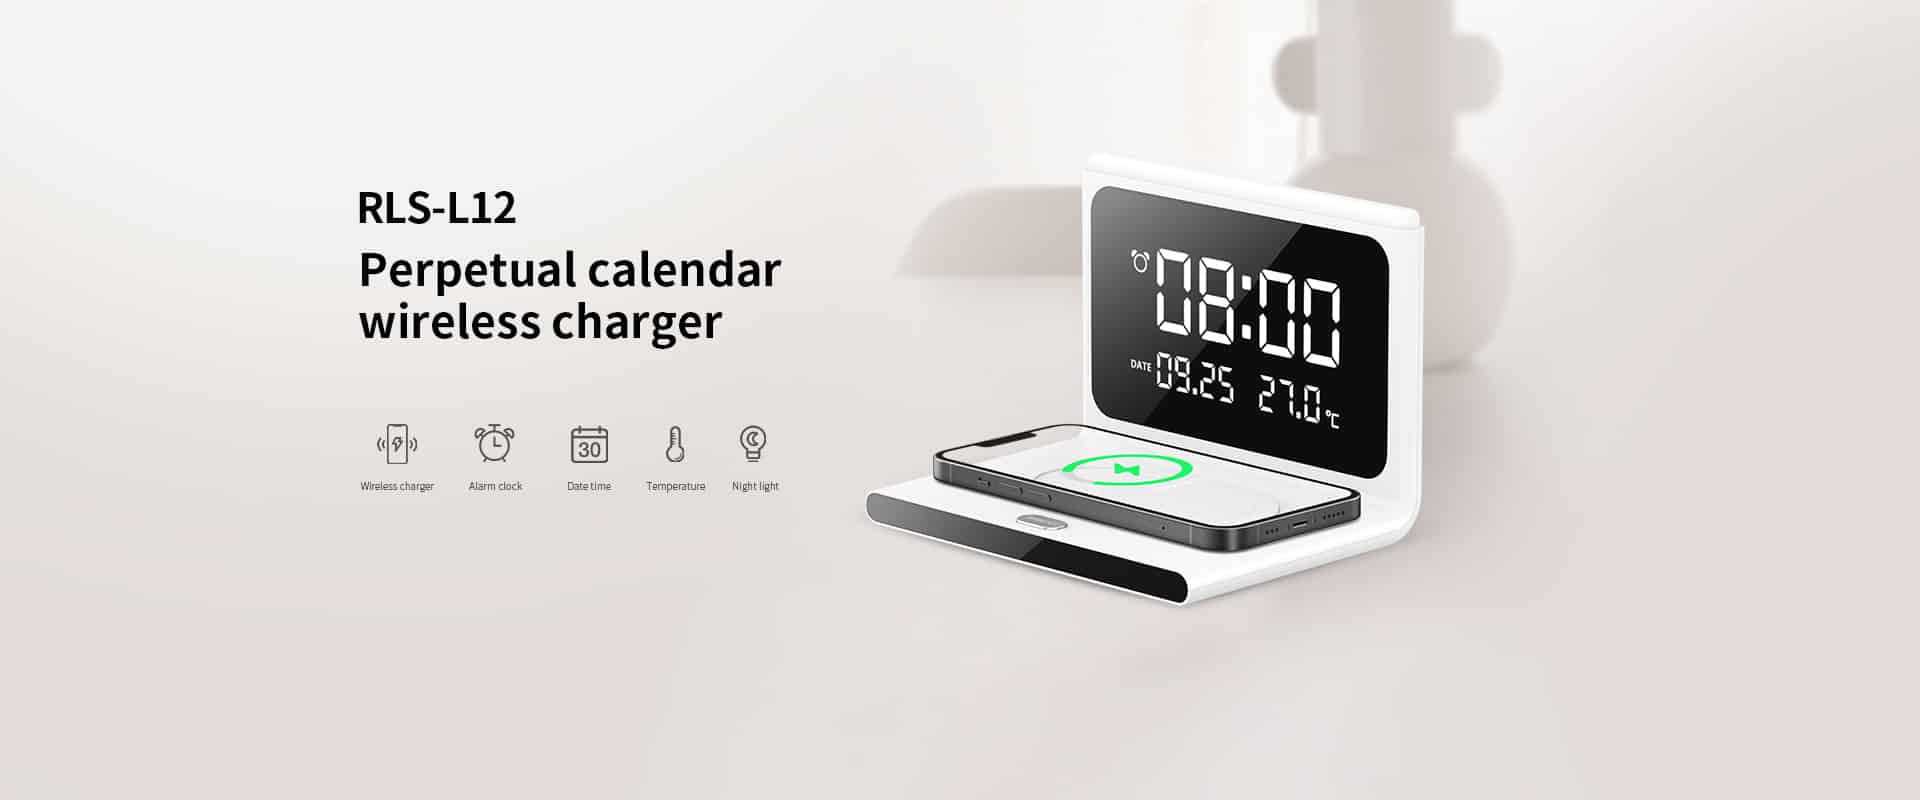 RECCI RLS L12 Perpetual Calendar with 15W Wireless Charger 5